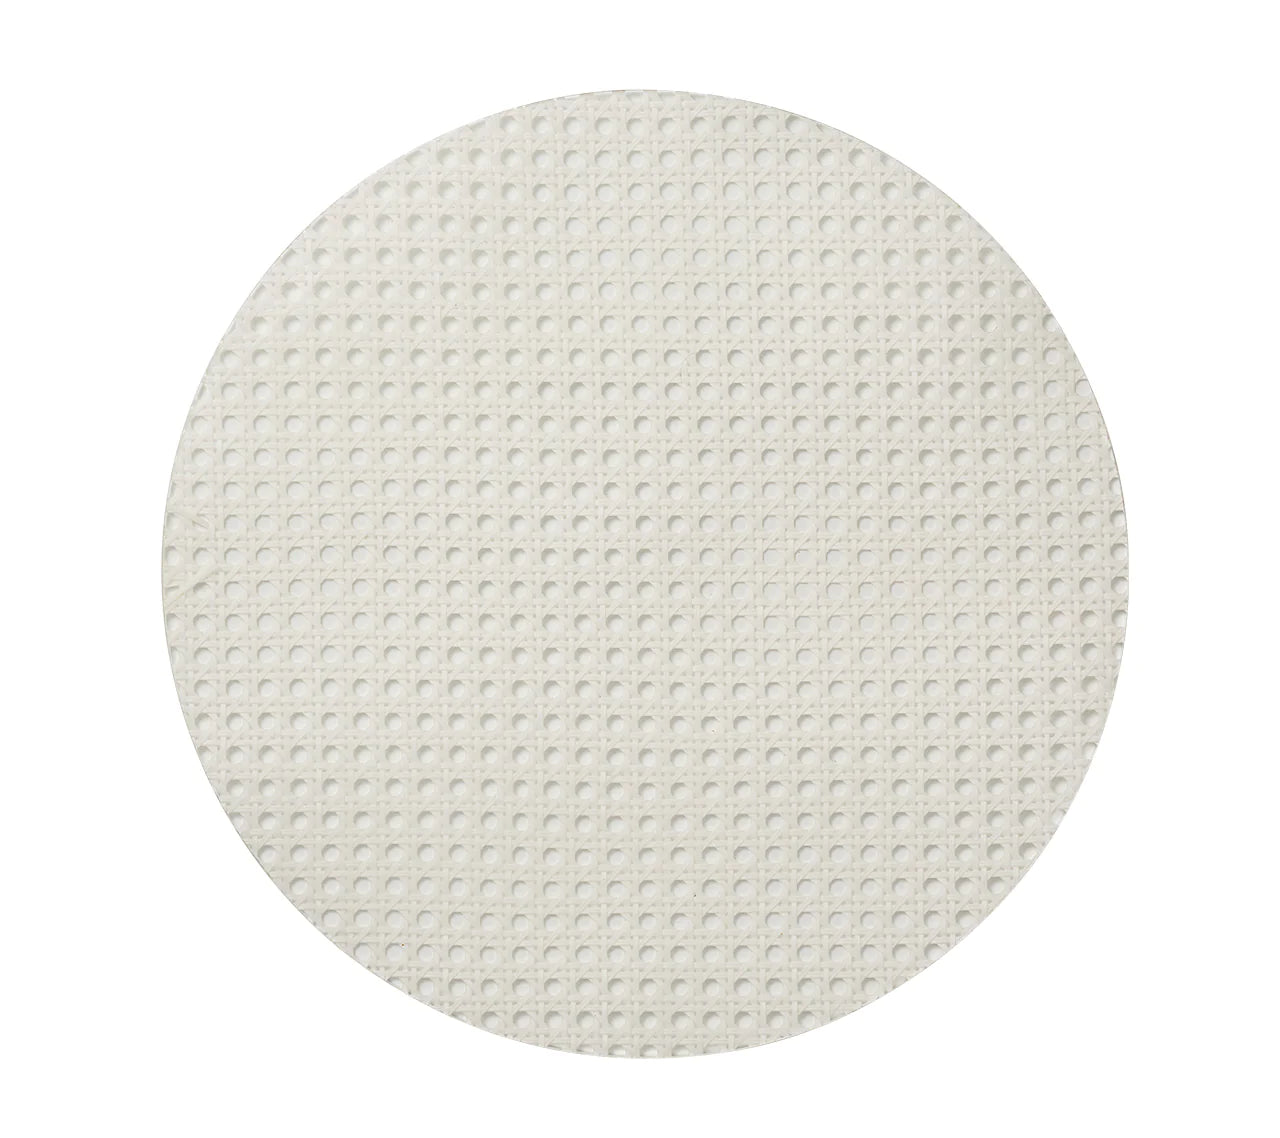 Reed Placemat in White, Set of 4